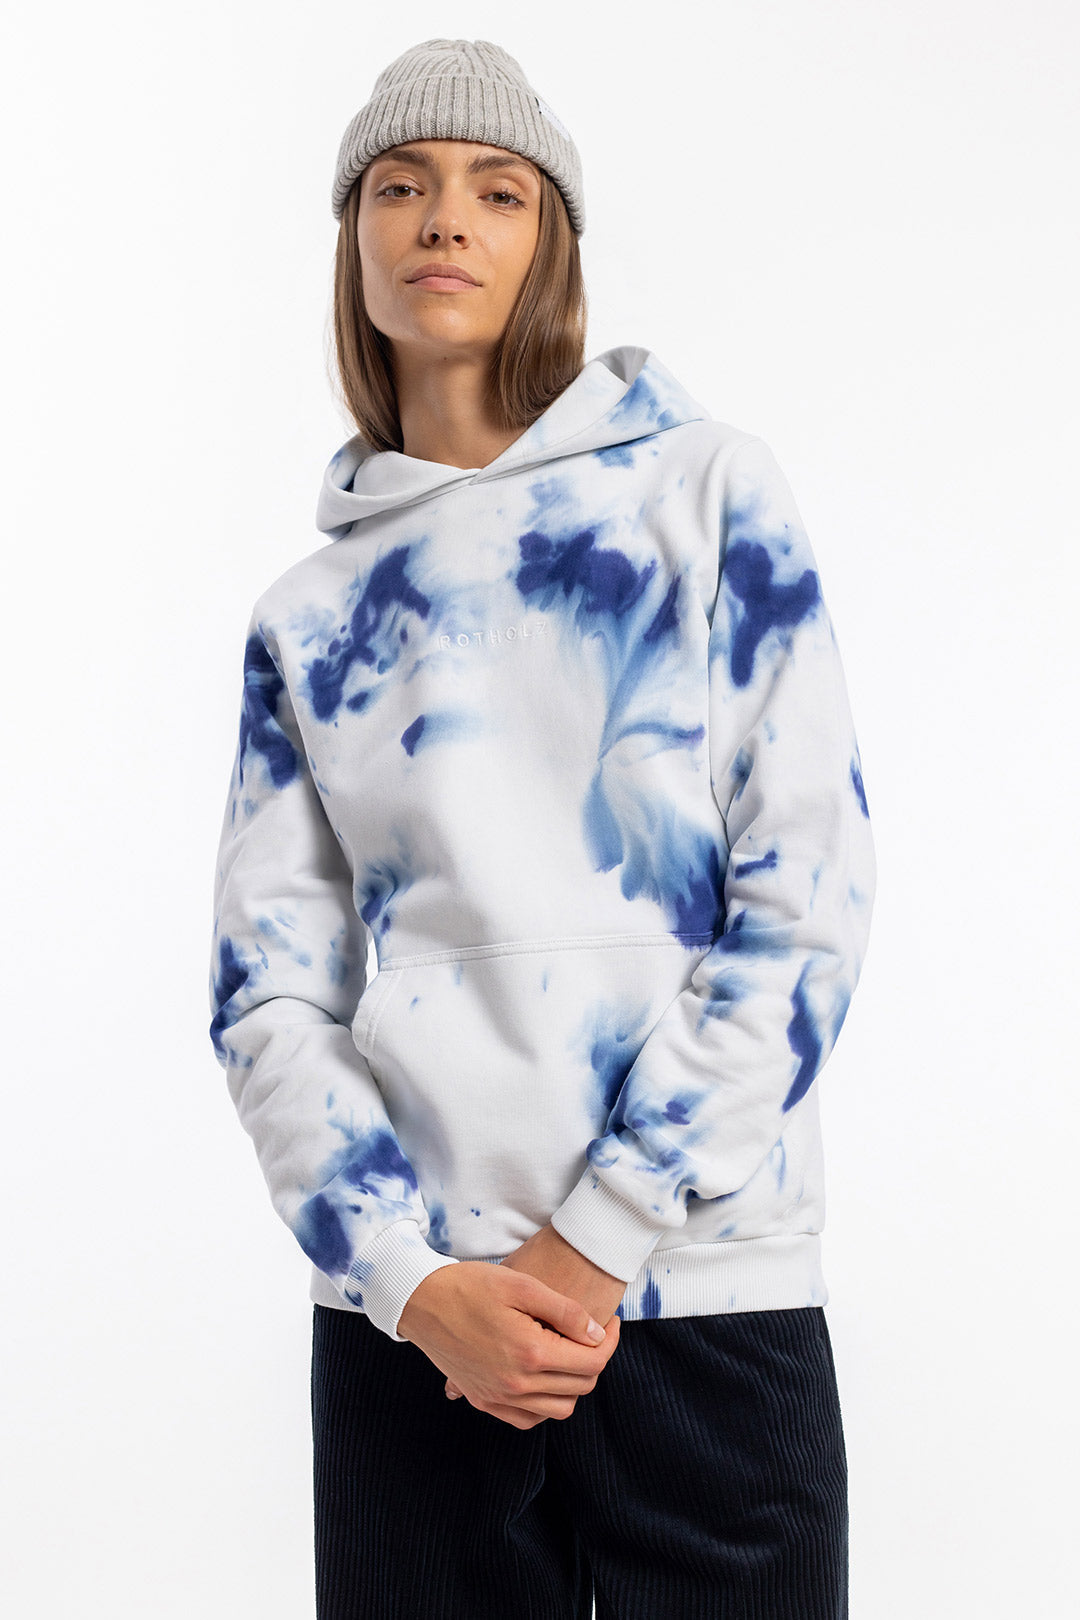 Batik hoodie made from 100% organic cotton from Rotholz